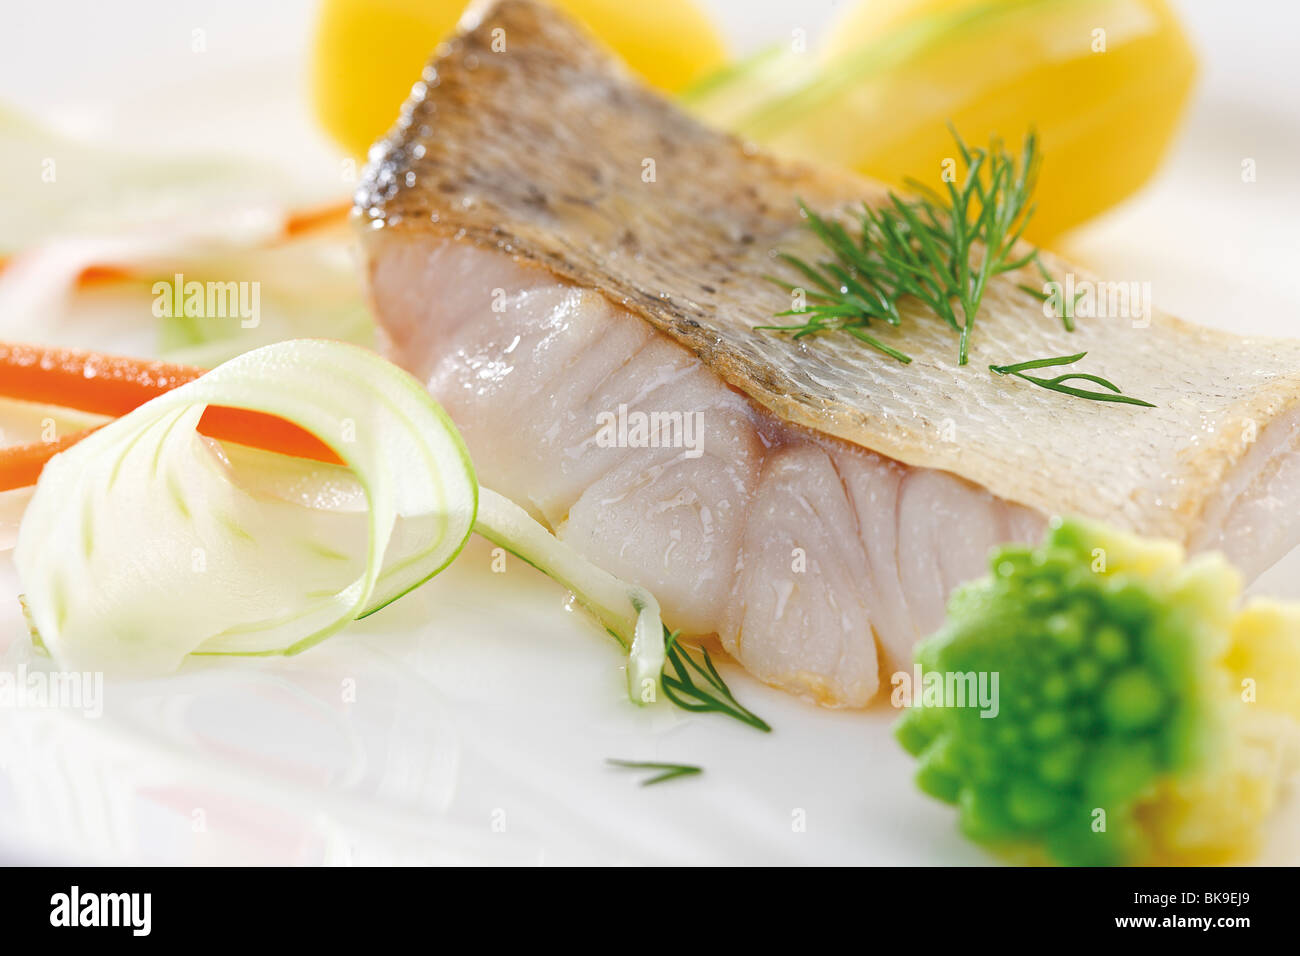 Zander Filet High Resolution Stock Photography and Images - Alamy